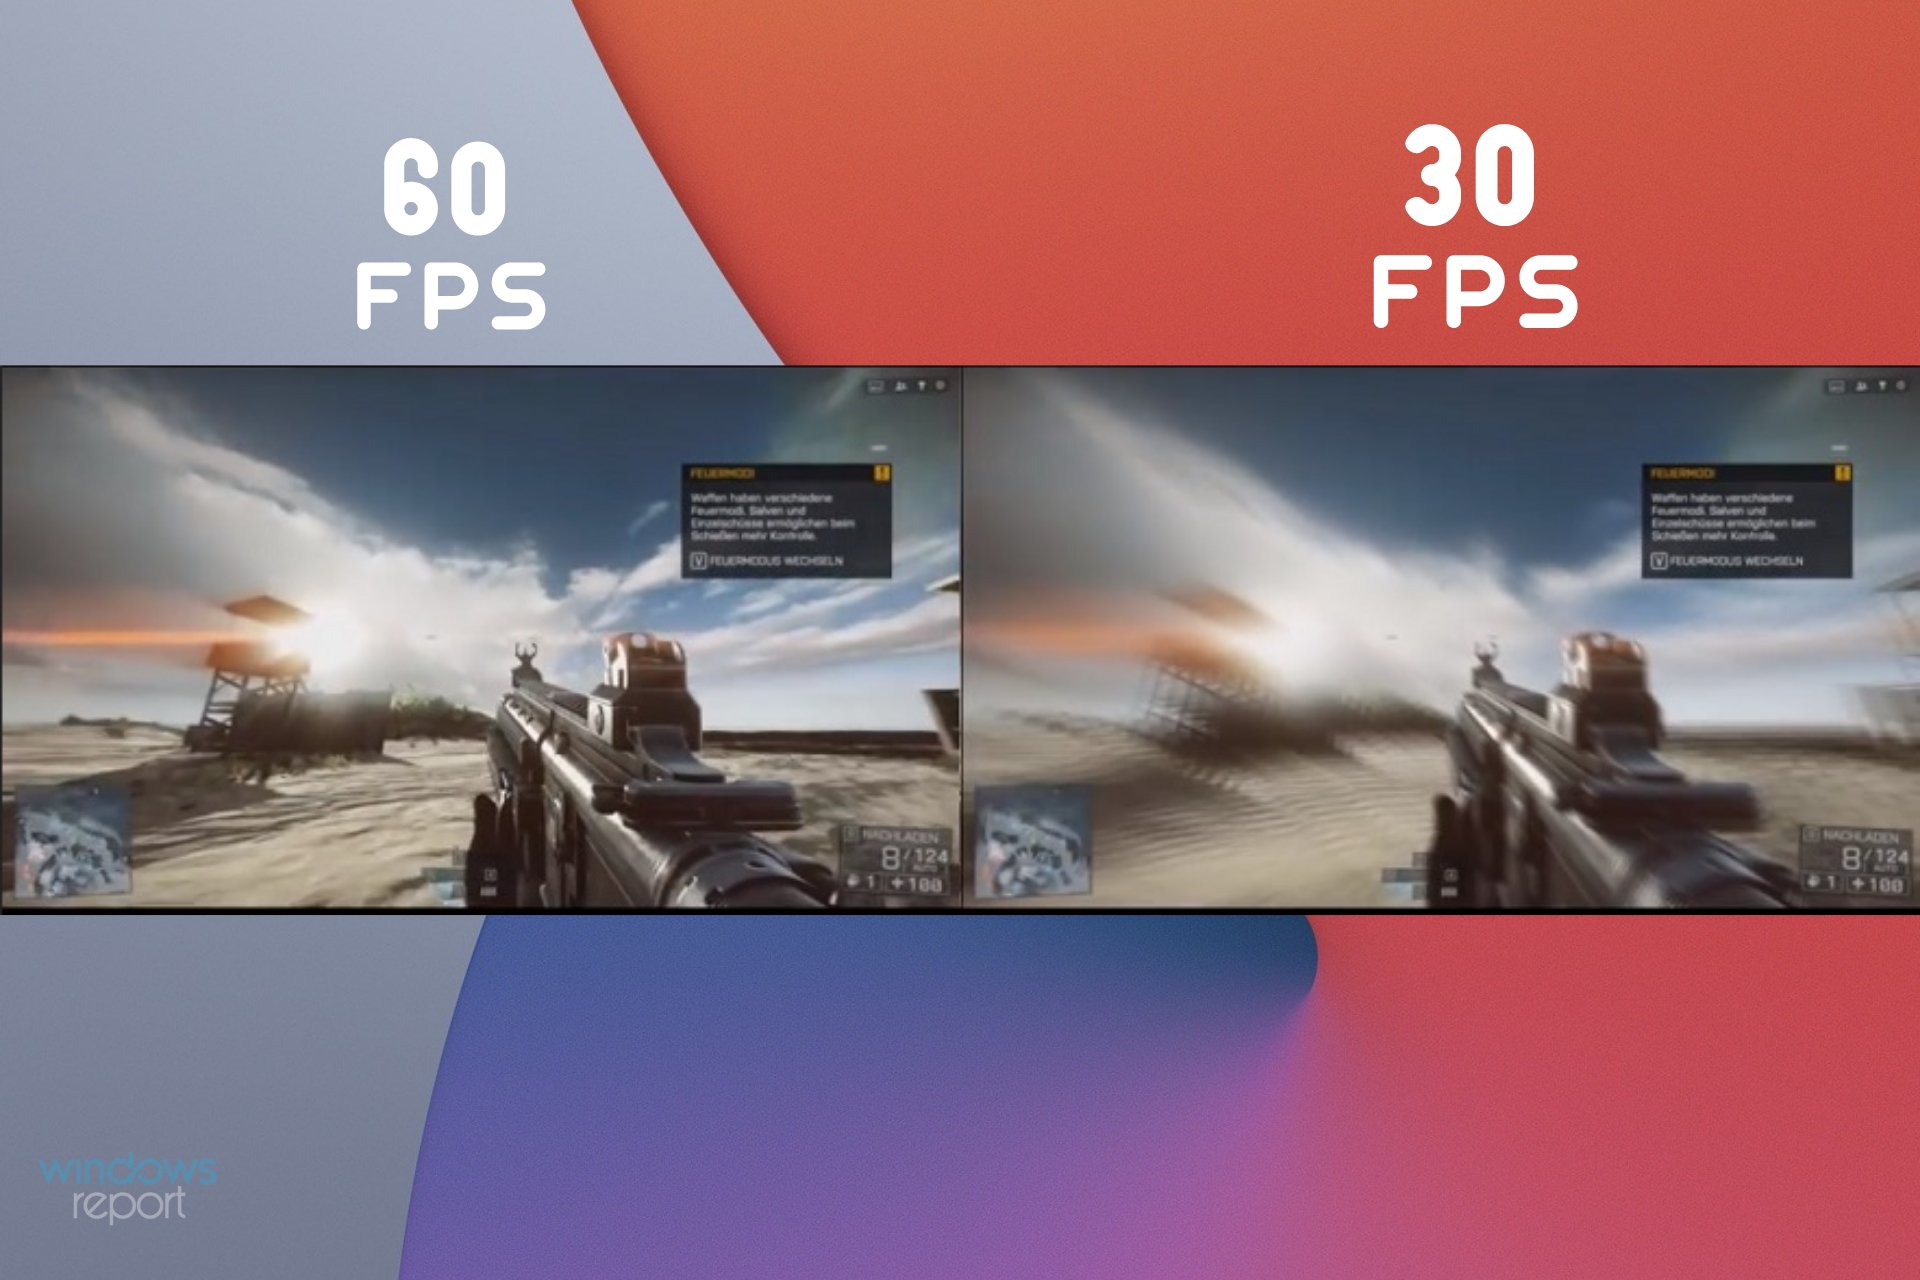 Is 30 fps laggy?